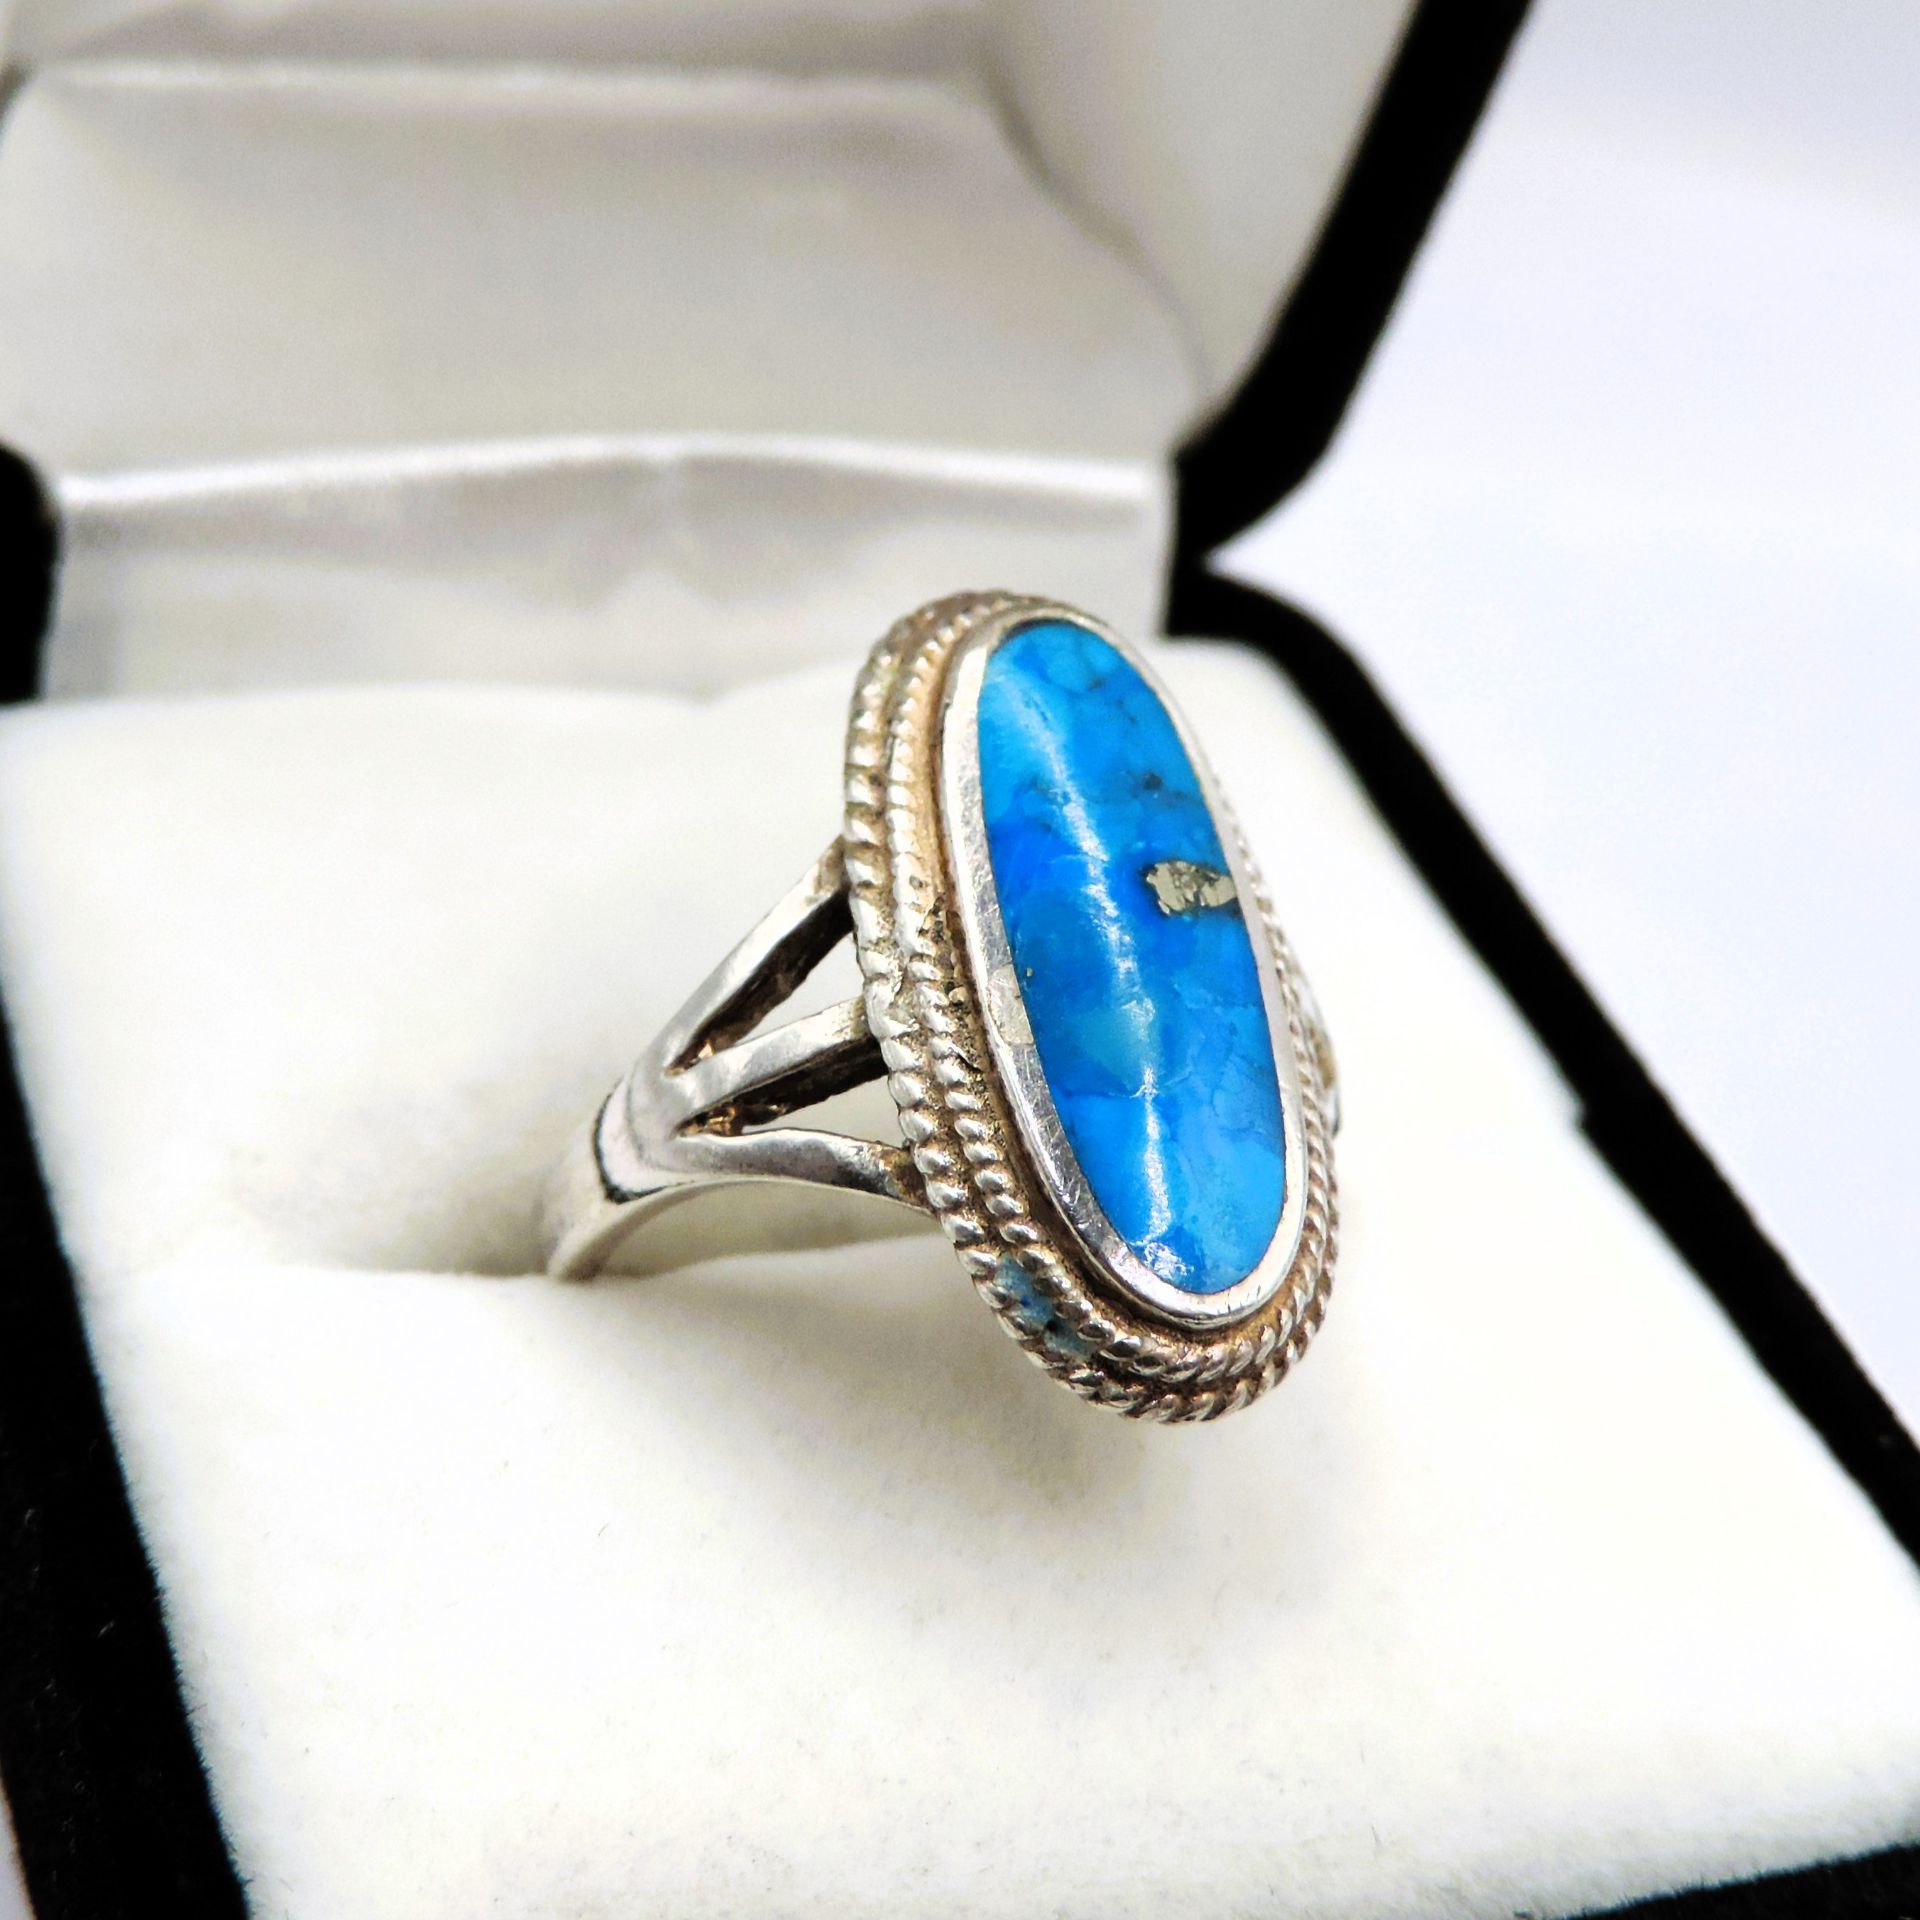 Artisan Sterling Silver Apatite Gemstone Ring. A fine quality Sterling silver ring set with an Apati - Image 2 of 3